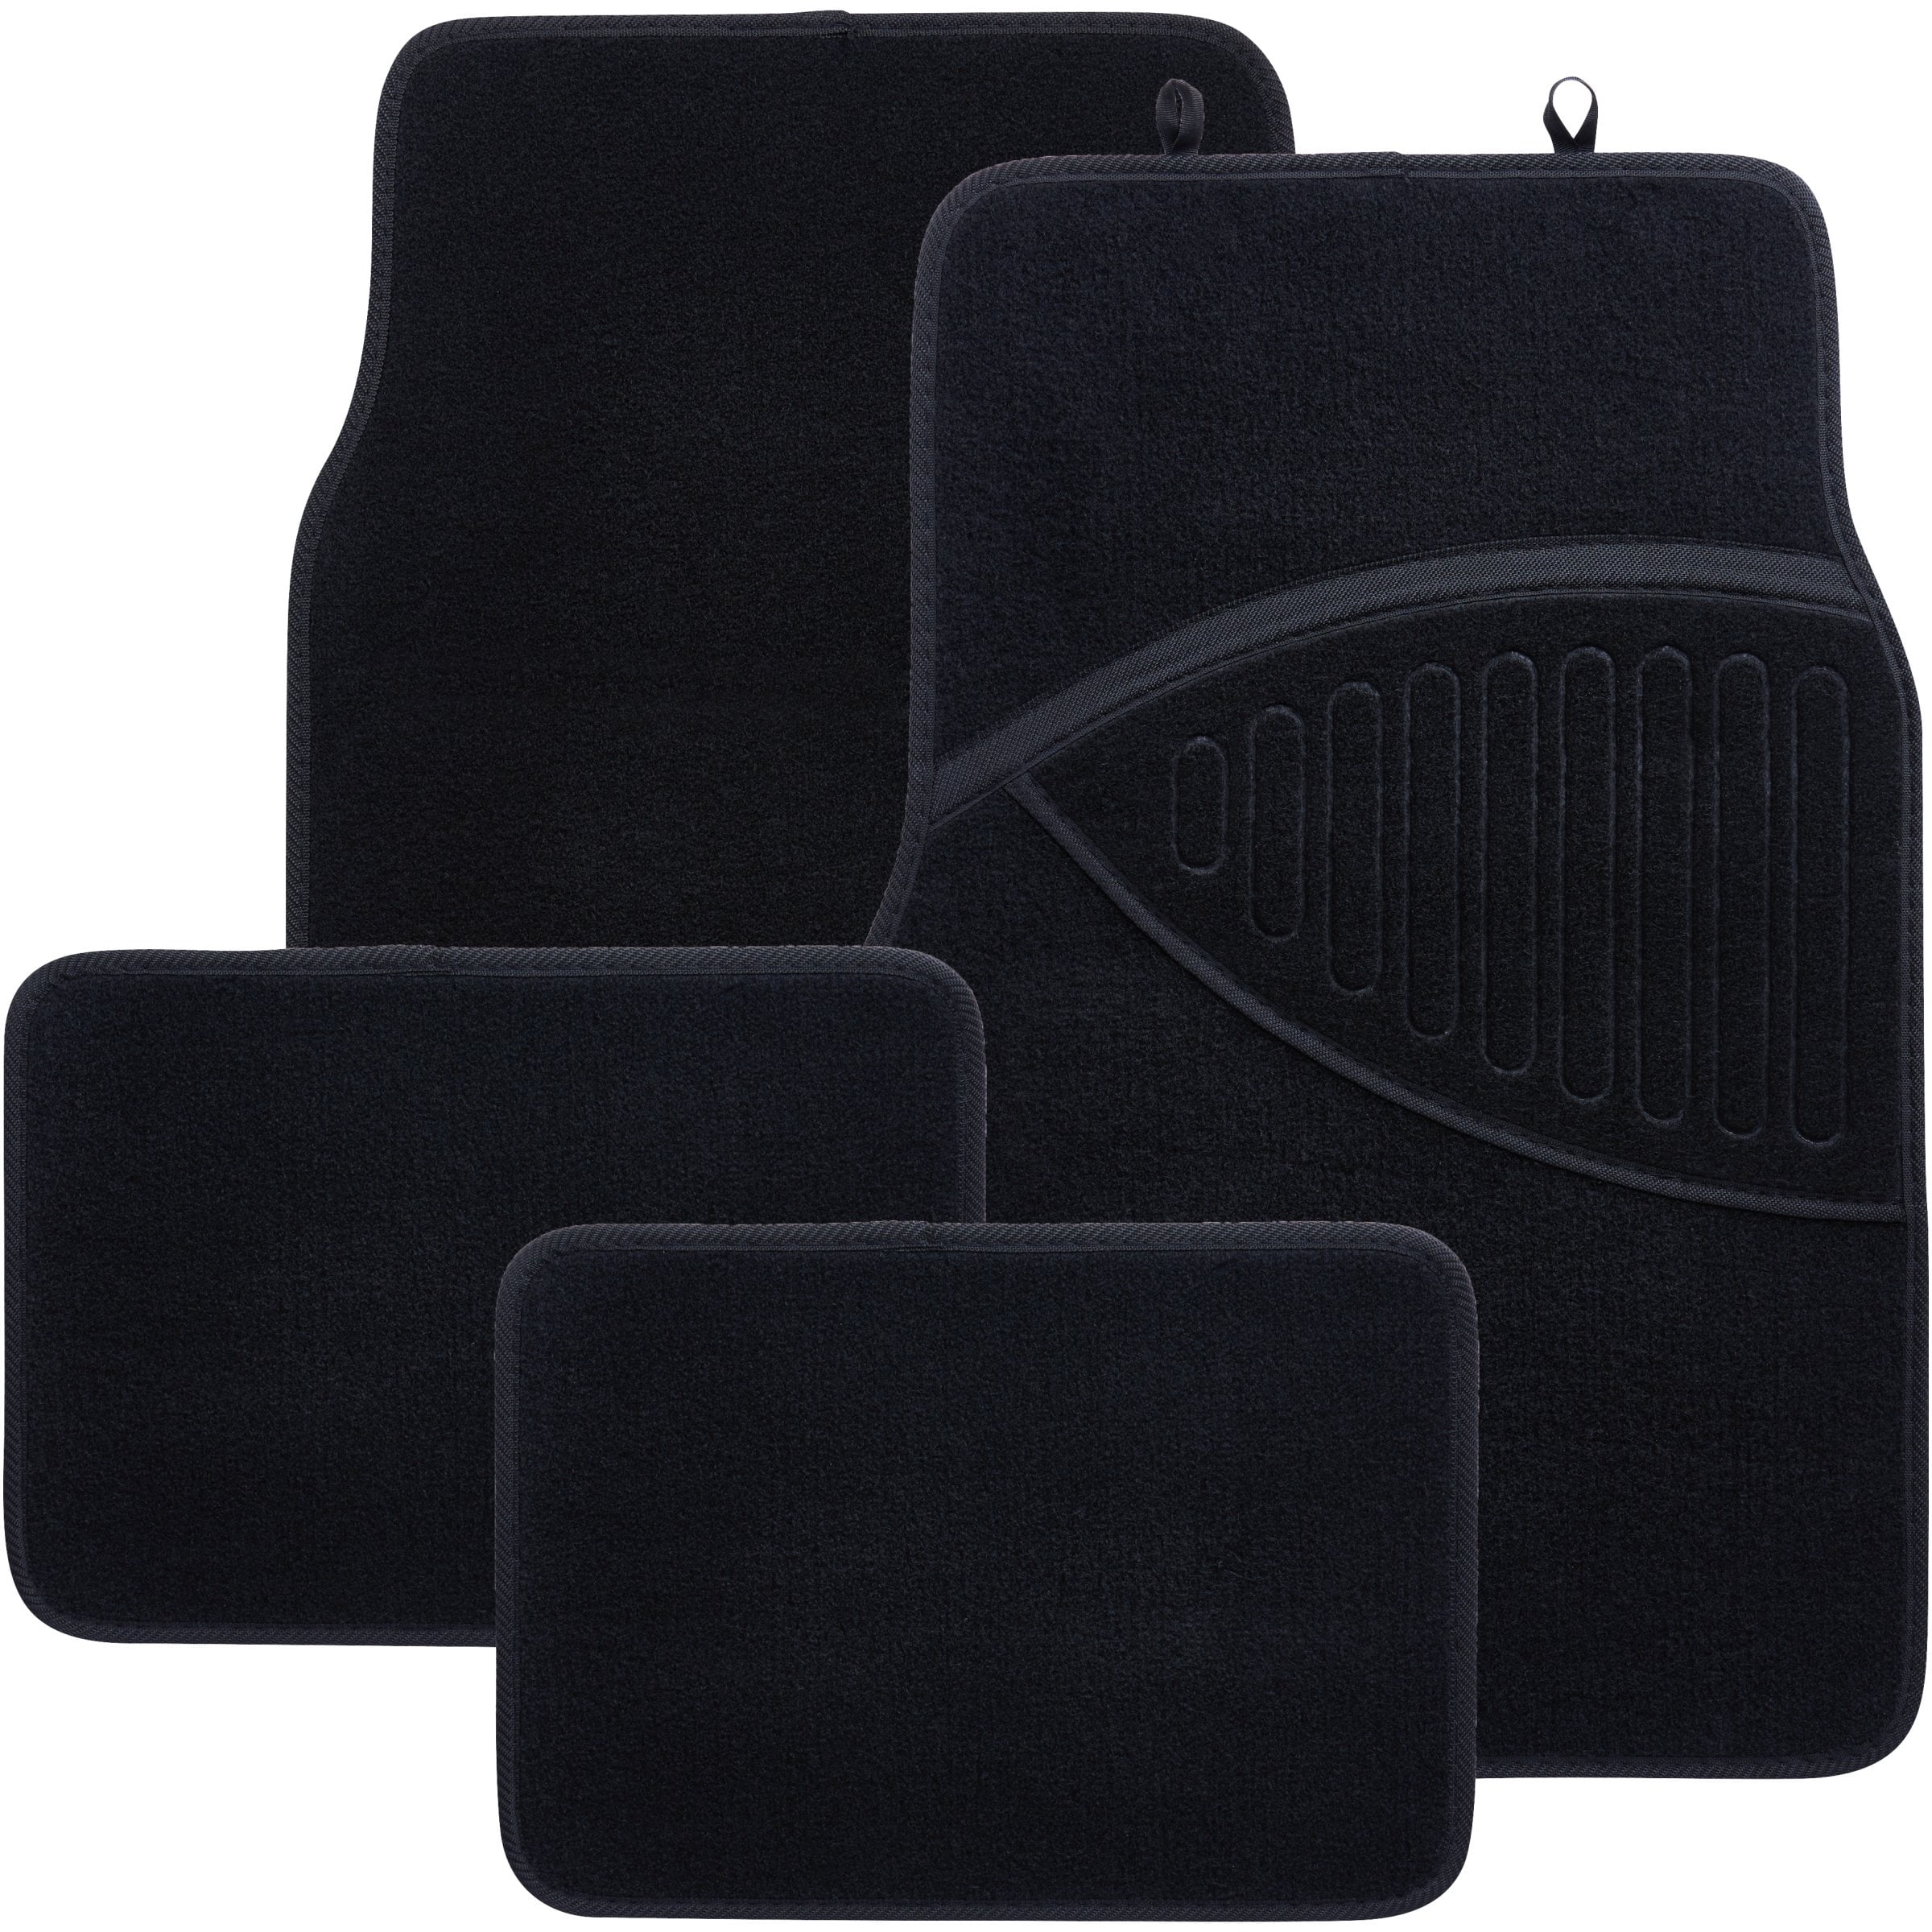 Anti-Slip Fits Most Vehicles Fits All Weather Removable & Washable BH1600 Full Set 4PC Car Floor Carpet Mats Front & Rear Automotive Rugs BELL+HOWELL 